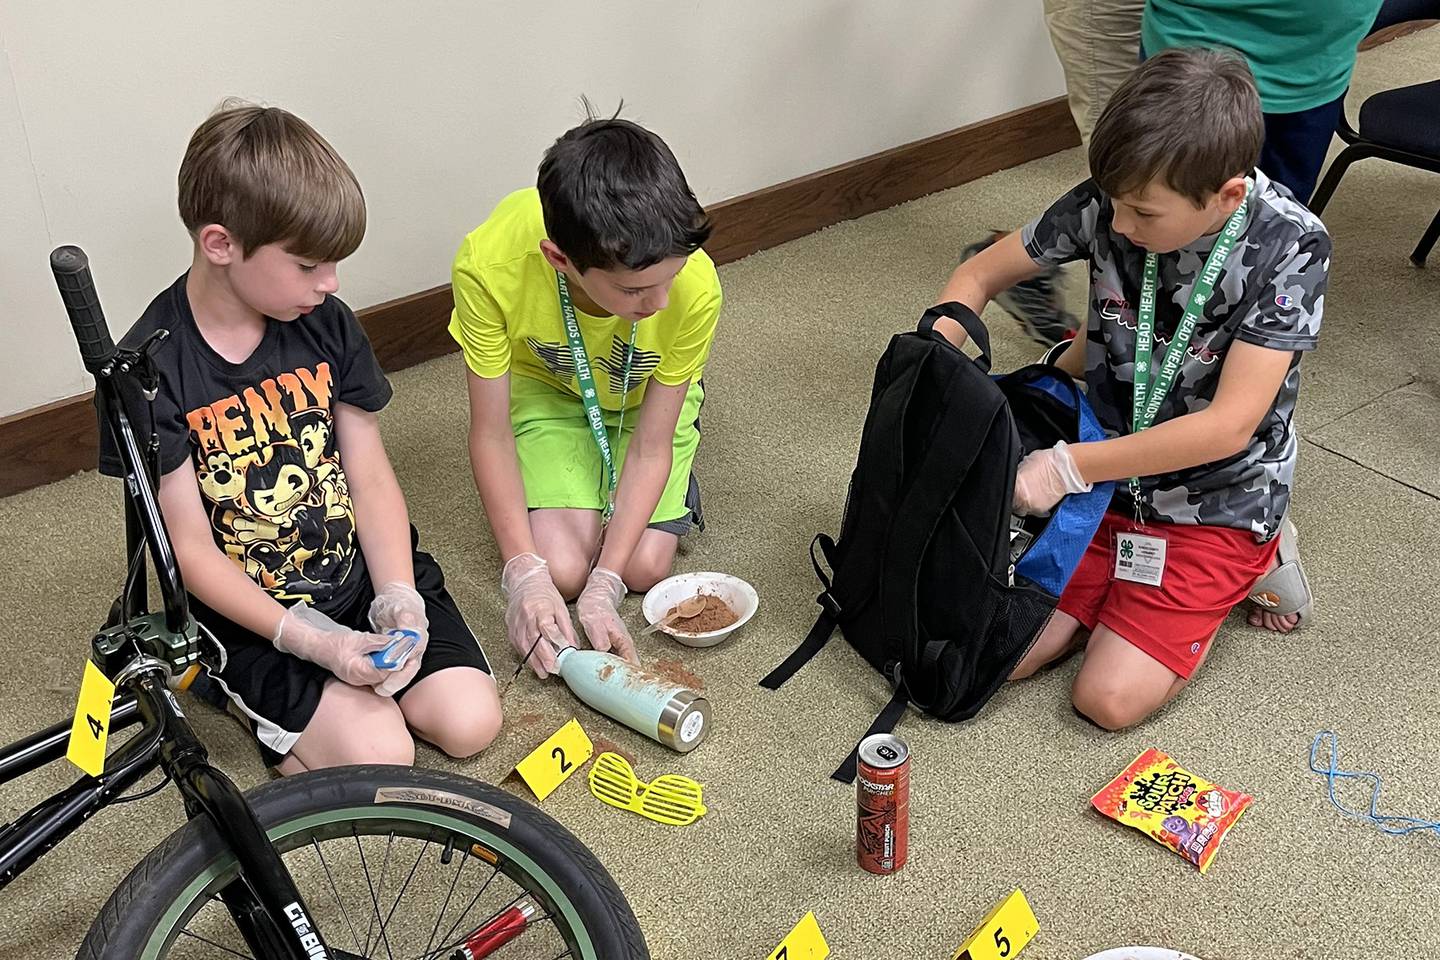 AJ McNeeley (pictured left to right), Nashten Funderberg and Nicholas Klinefelter examine evidence and dust for fingerprints of a mock crime scene during the final day of 4-H Crime and Spy camp.